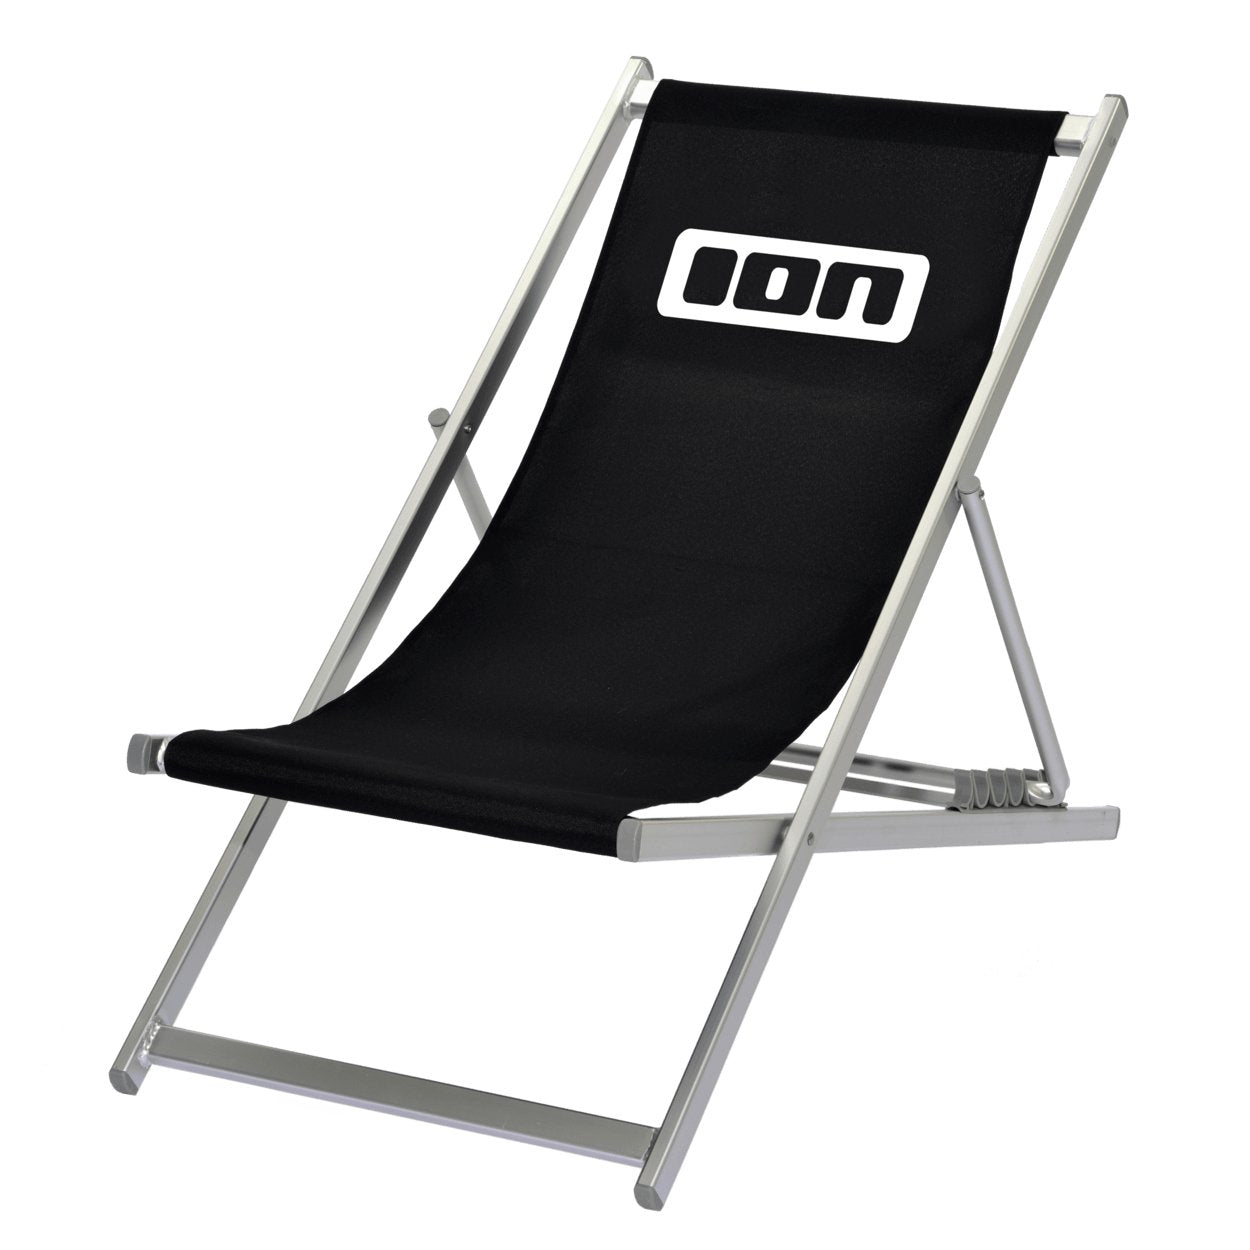 ION Beach Chair 2022 - Worthing Watersports - 9008415532841 - Promo - ION Water